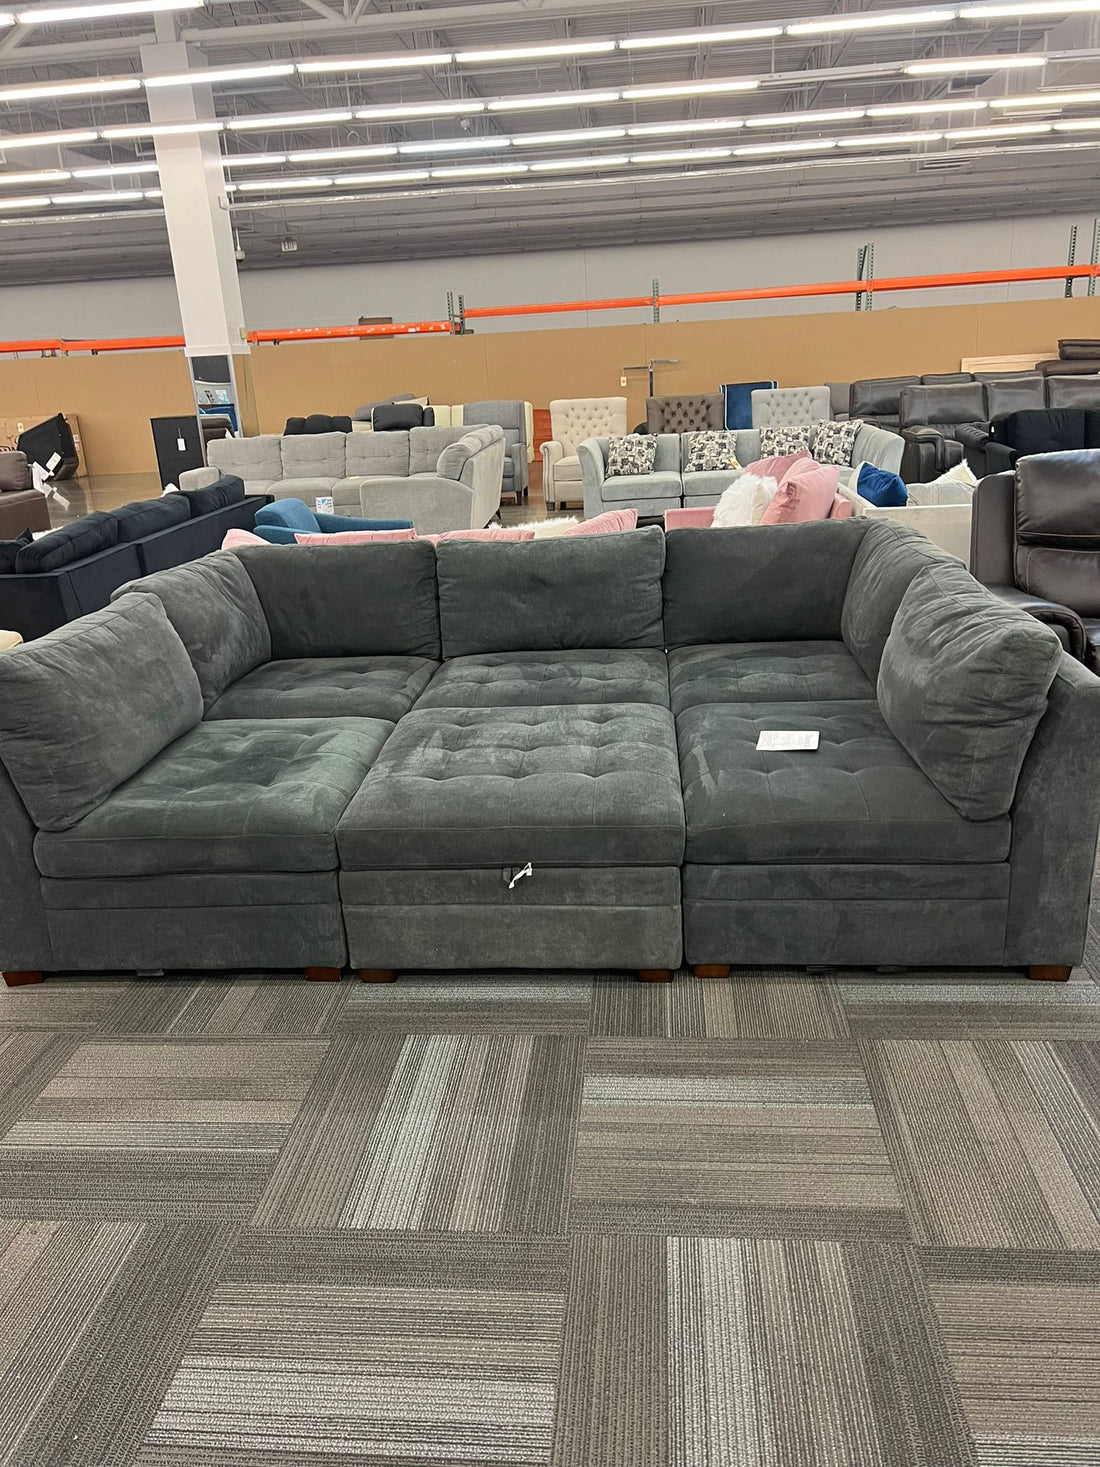 Thomasville Tisdale Modular Fabric Sectional with Storage Ottoman, Gre ...